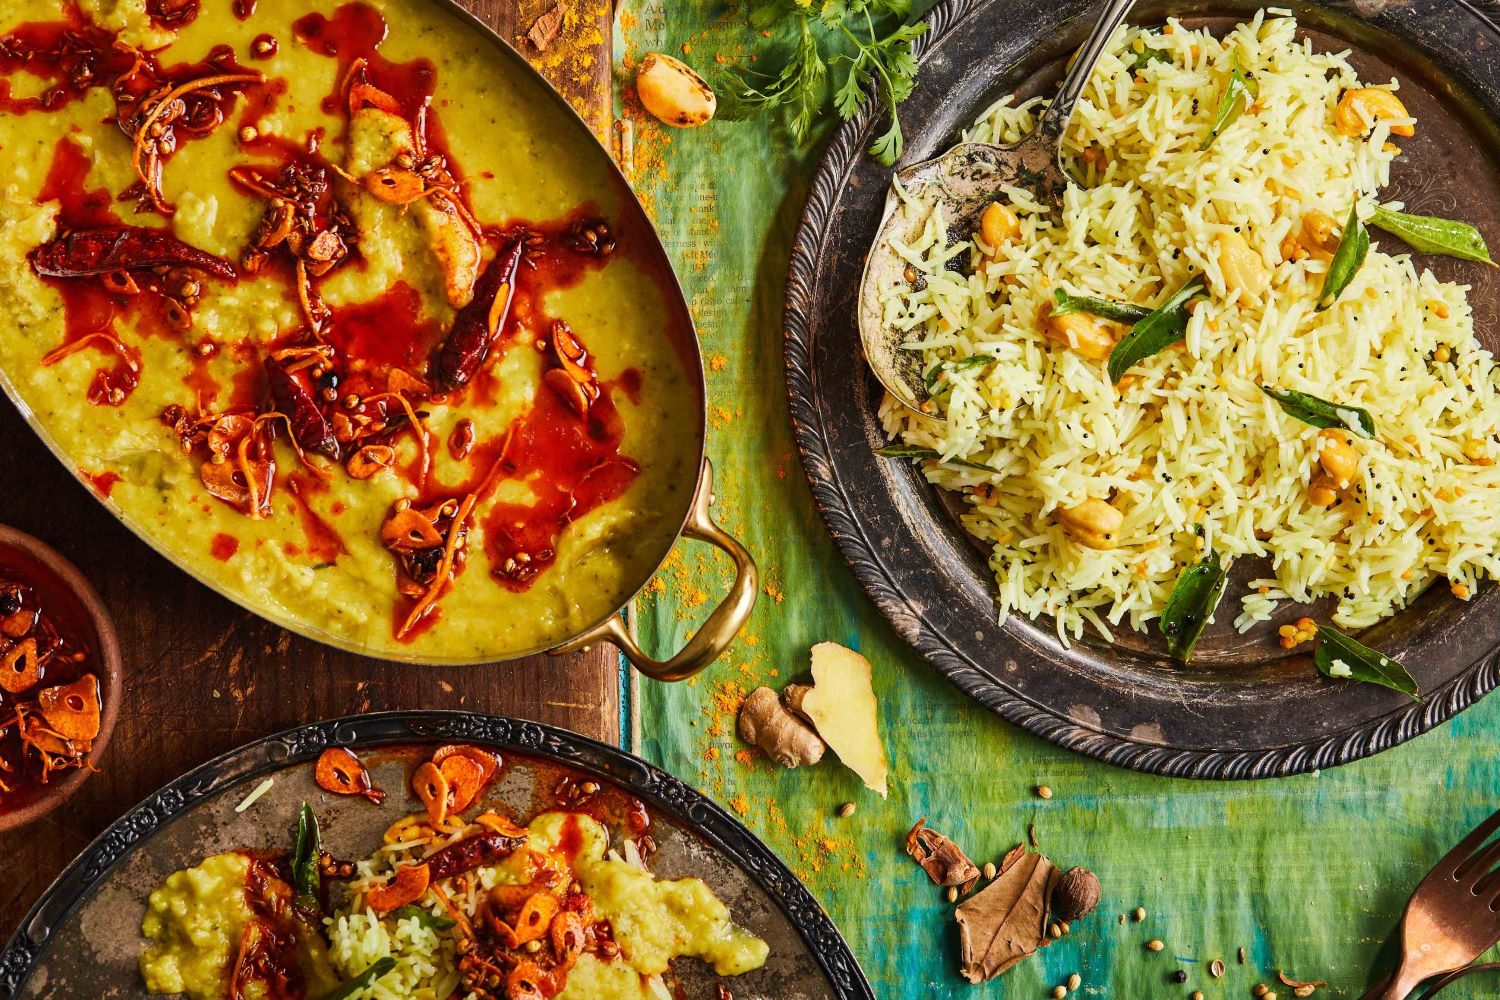 Mindful Gastronomy: An Indian Cuisine Exploration